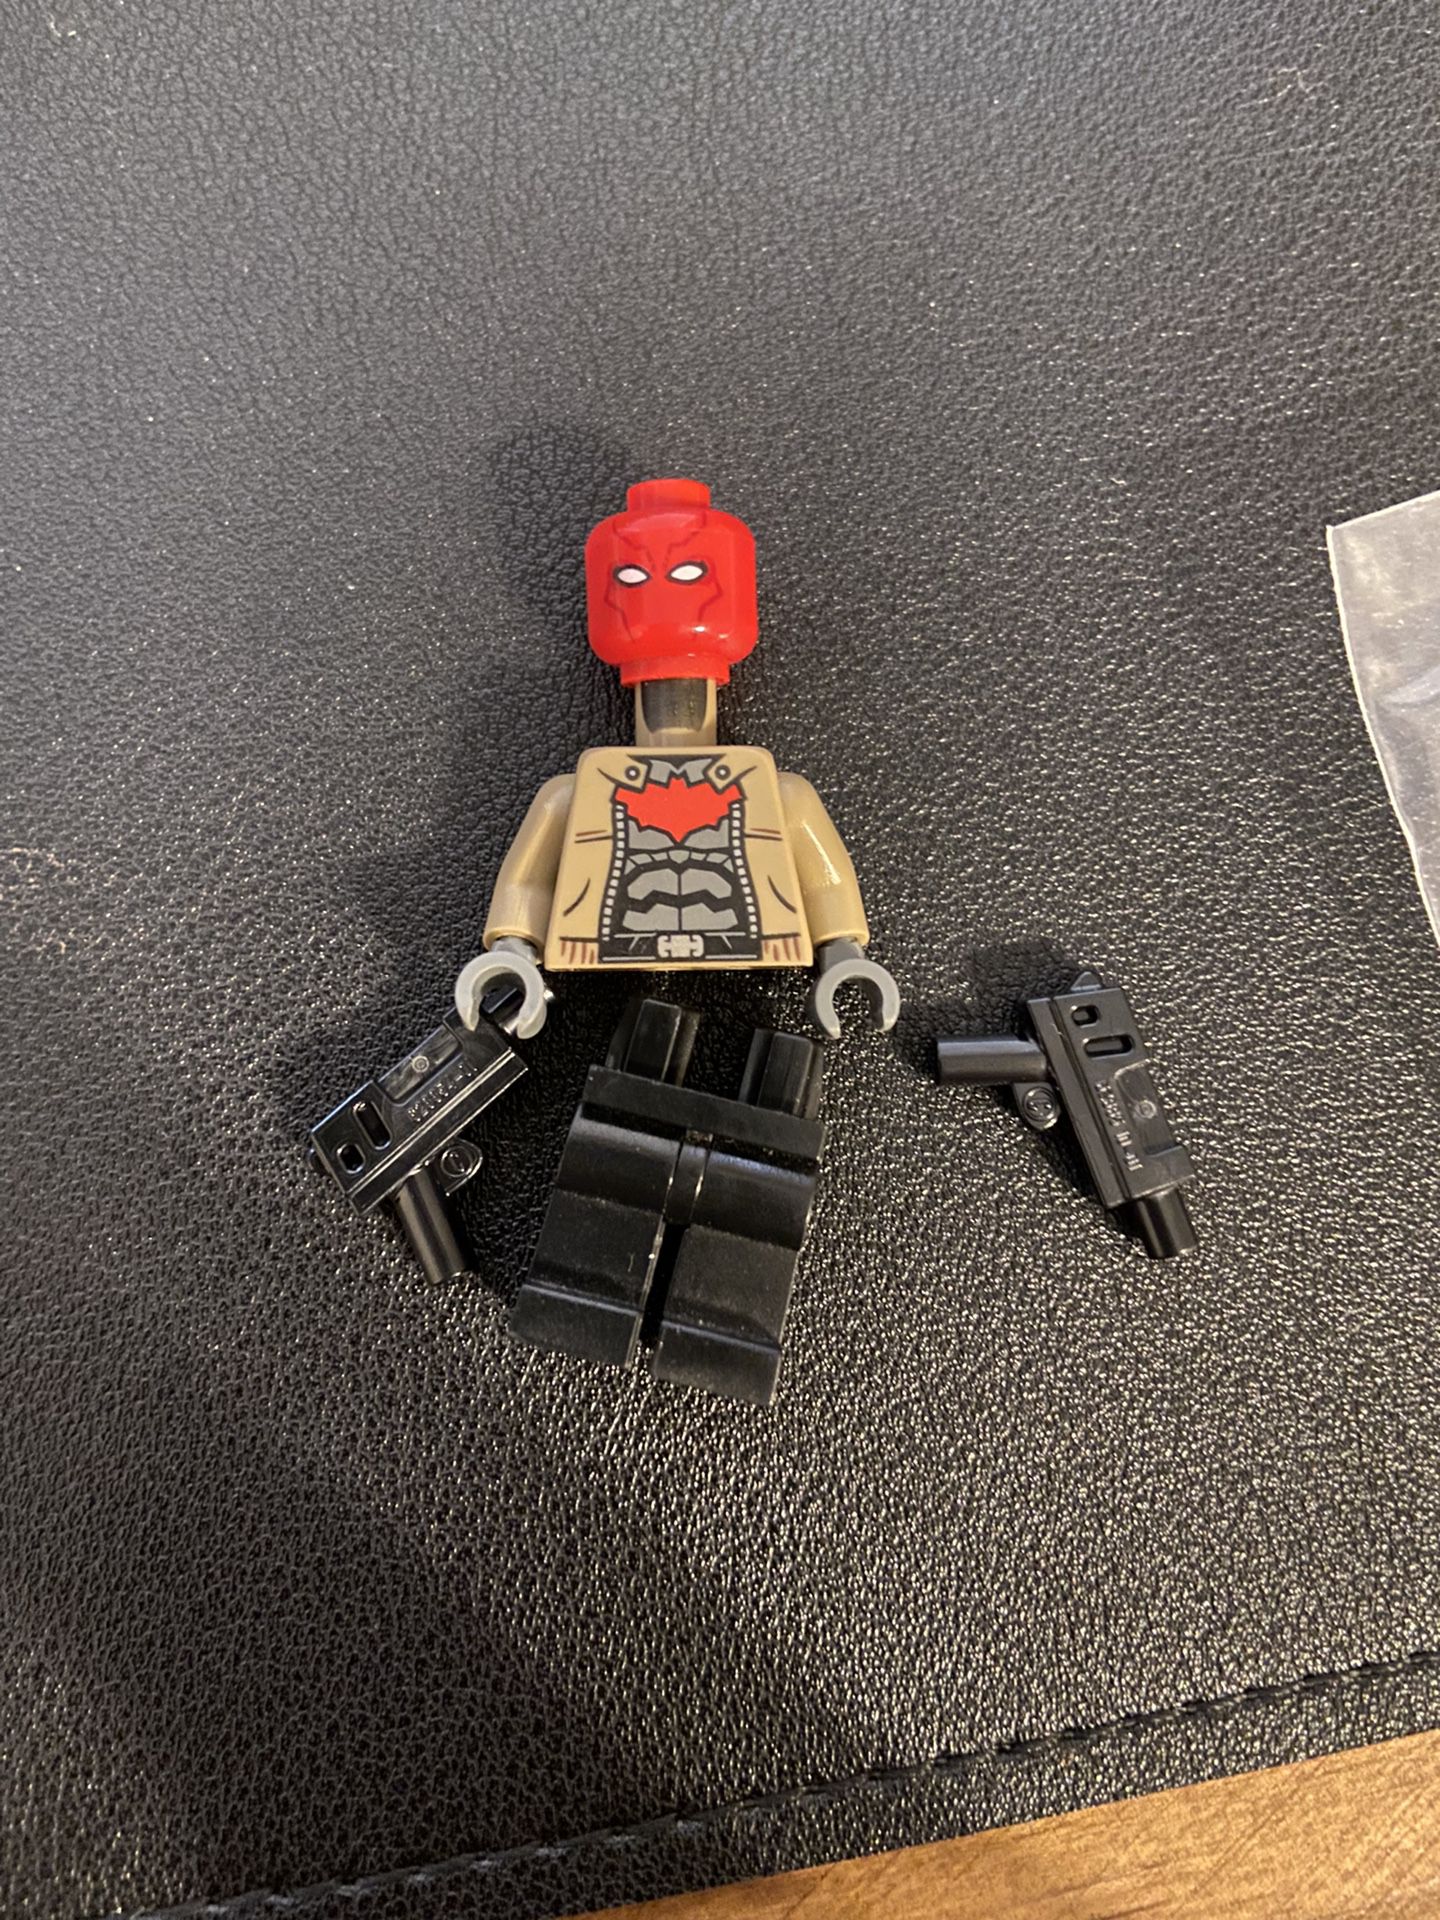 Lego Hood for Sale Fort Worth, TX - OfferUp